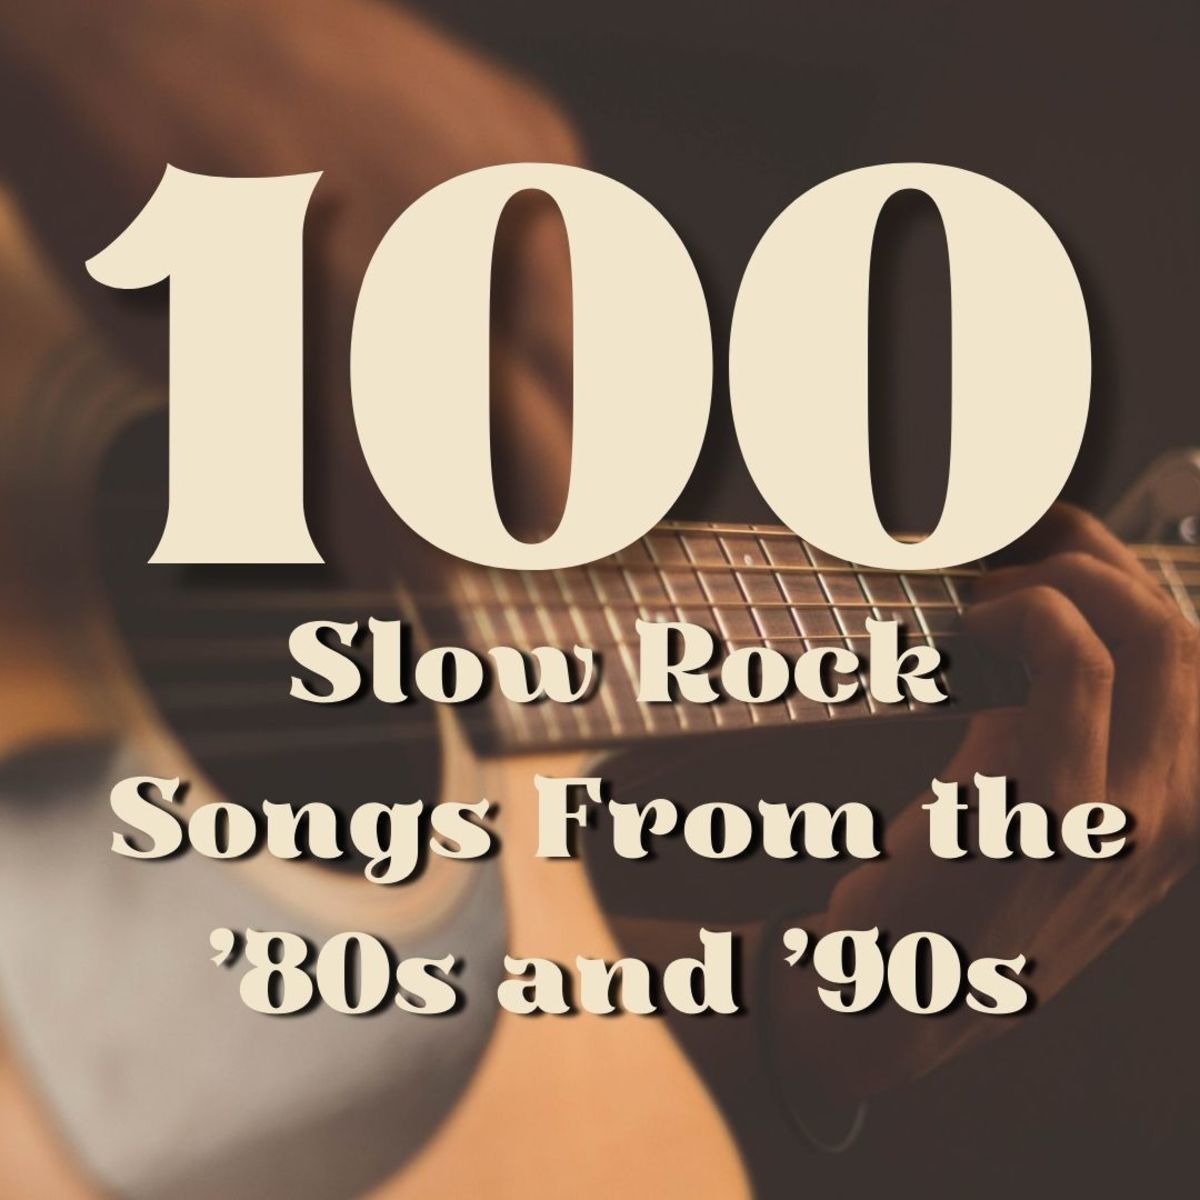 Slow rock is an umbrella term used to describe a variety of slow-tempo rock songs such as rock ballads, acoustic rock ballads, power ballads, hard rock ballads, and rock love songs. 